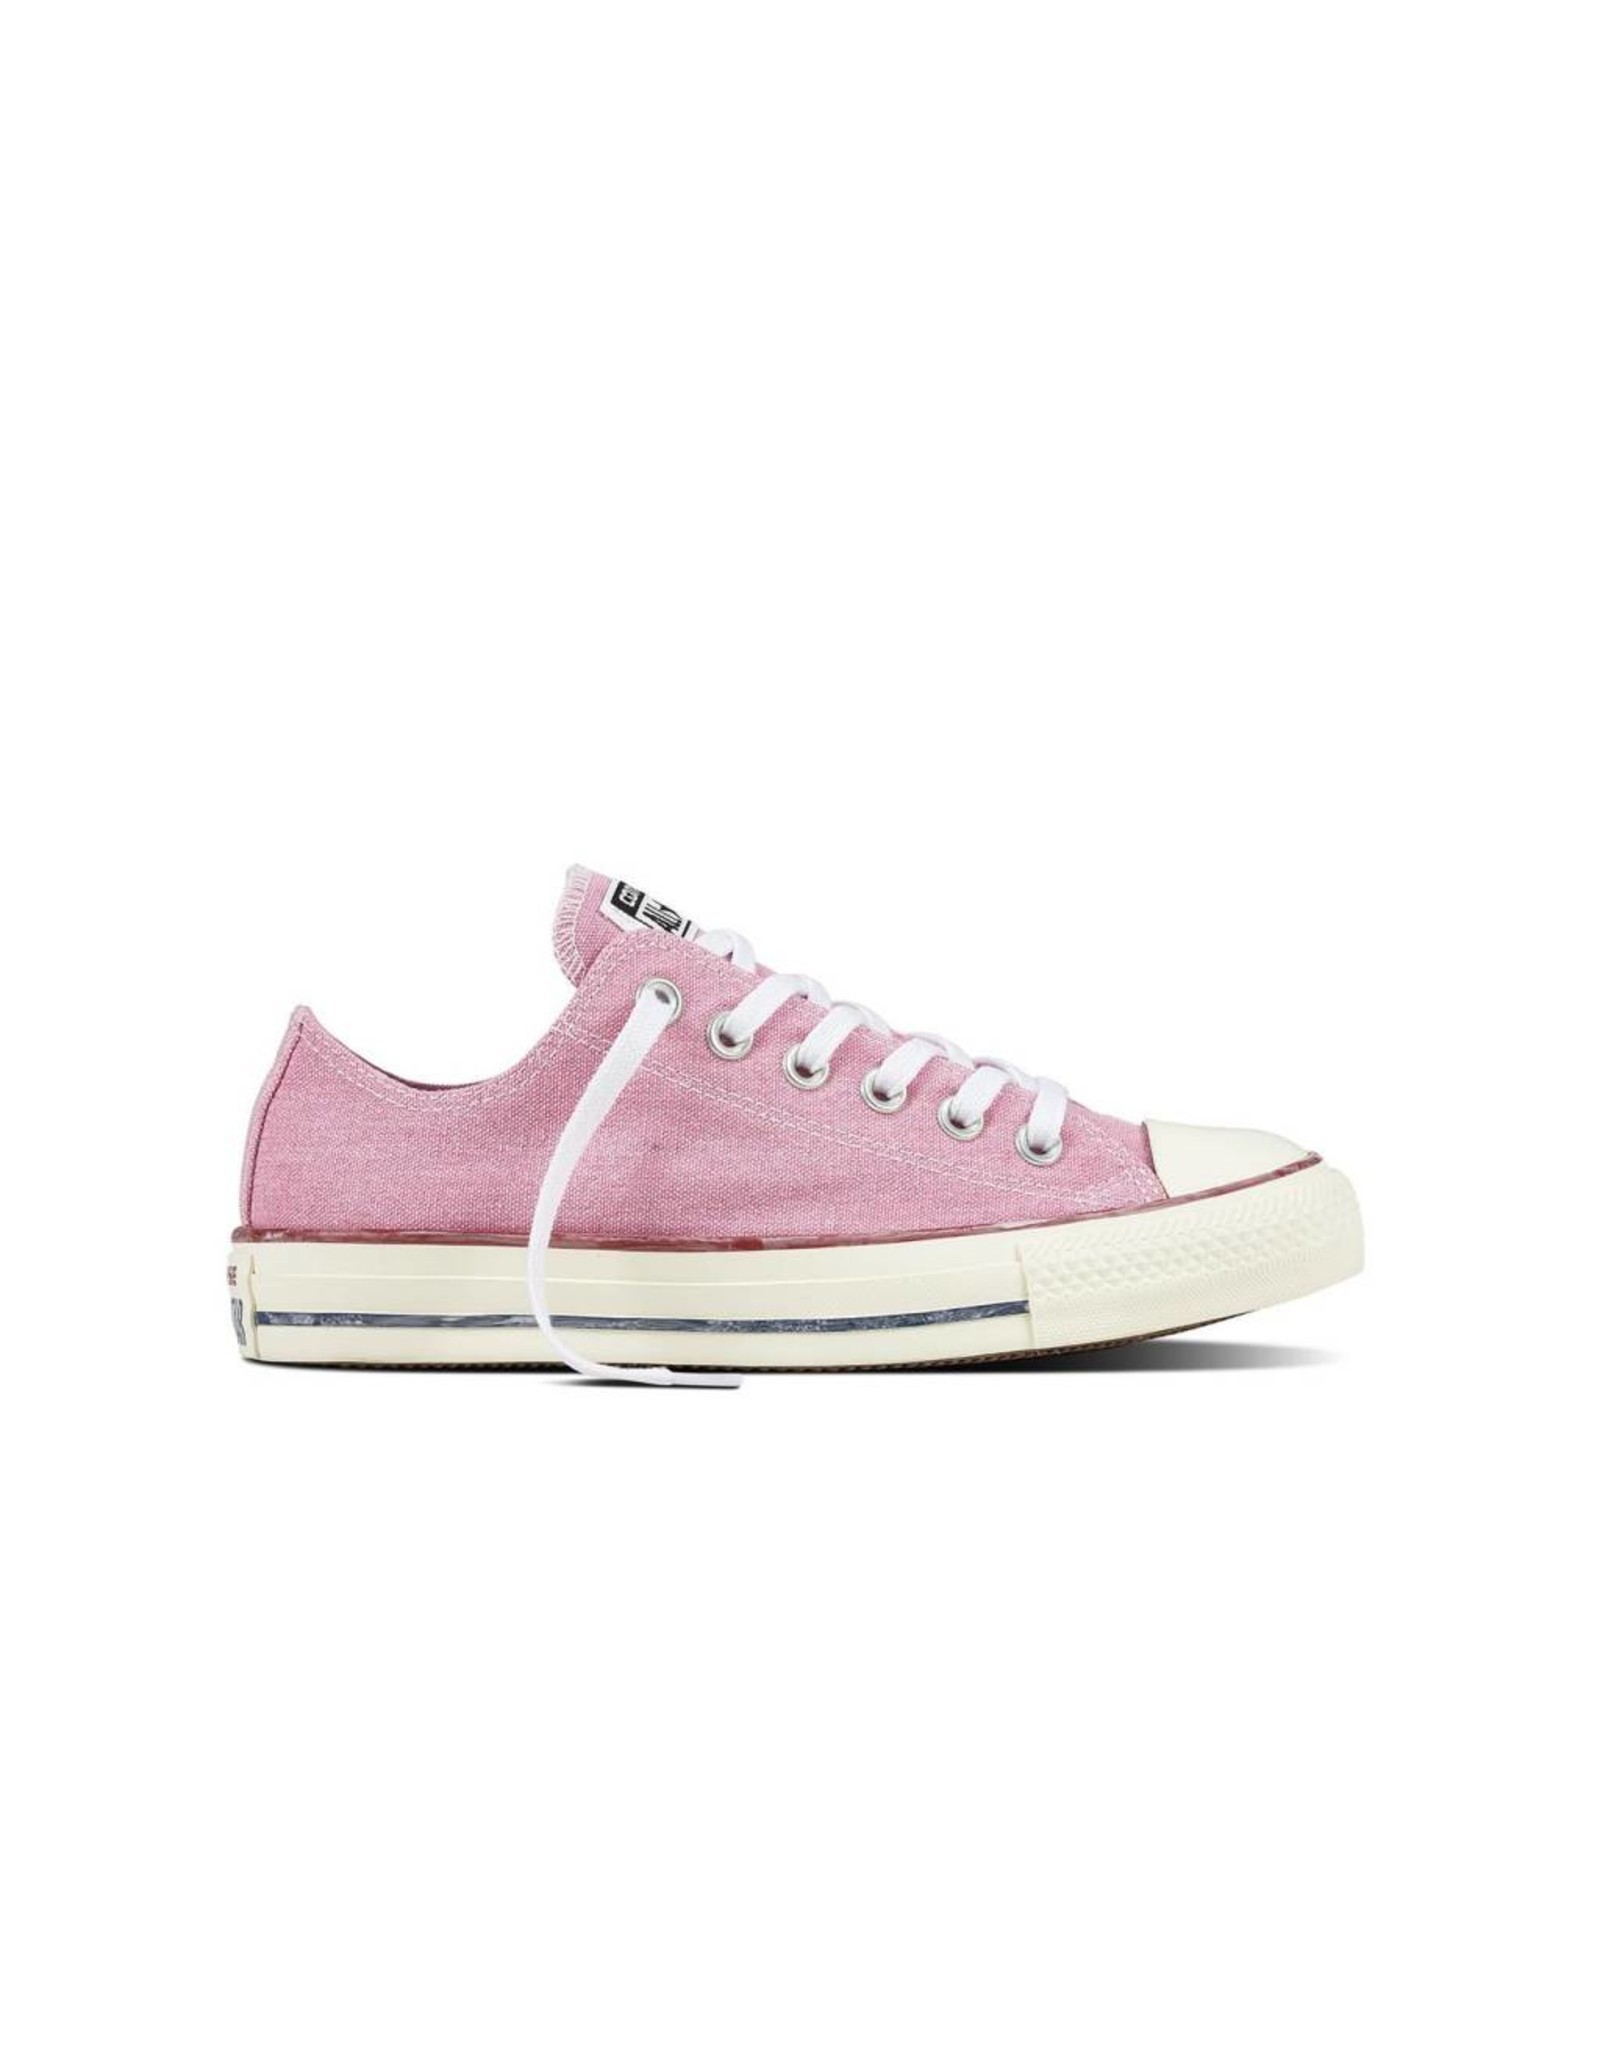 CHUCK TAYLOR OX LIGHT ORCHID/LIGHT ORCHID/WHITE C12VLO-159542C